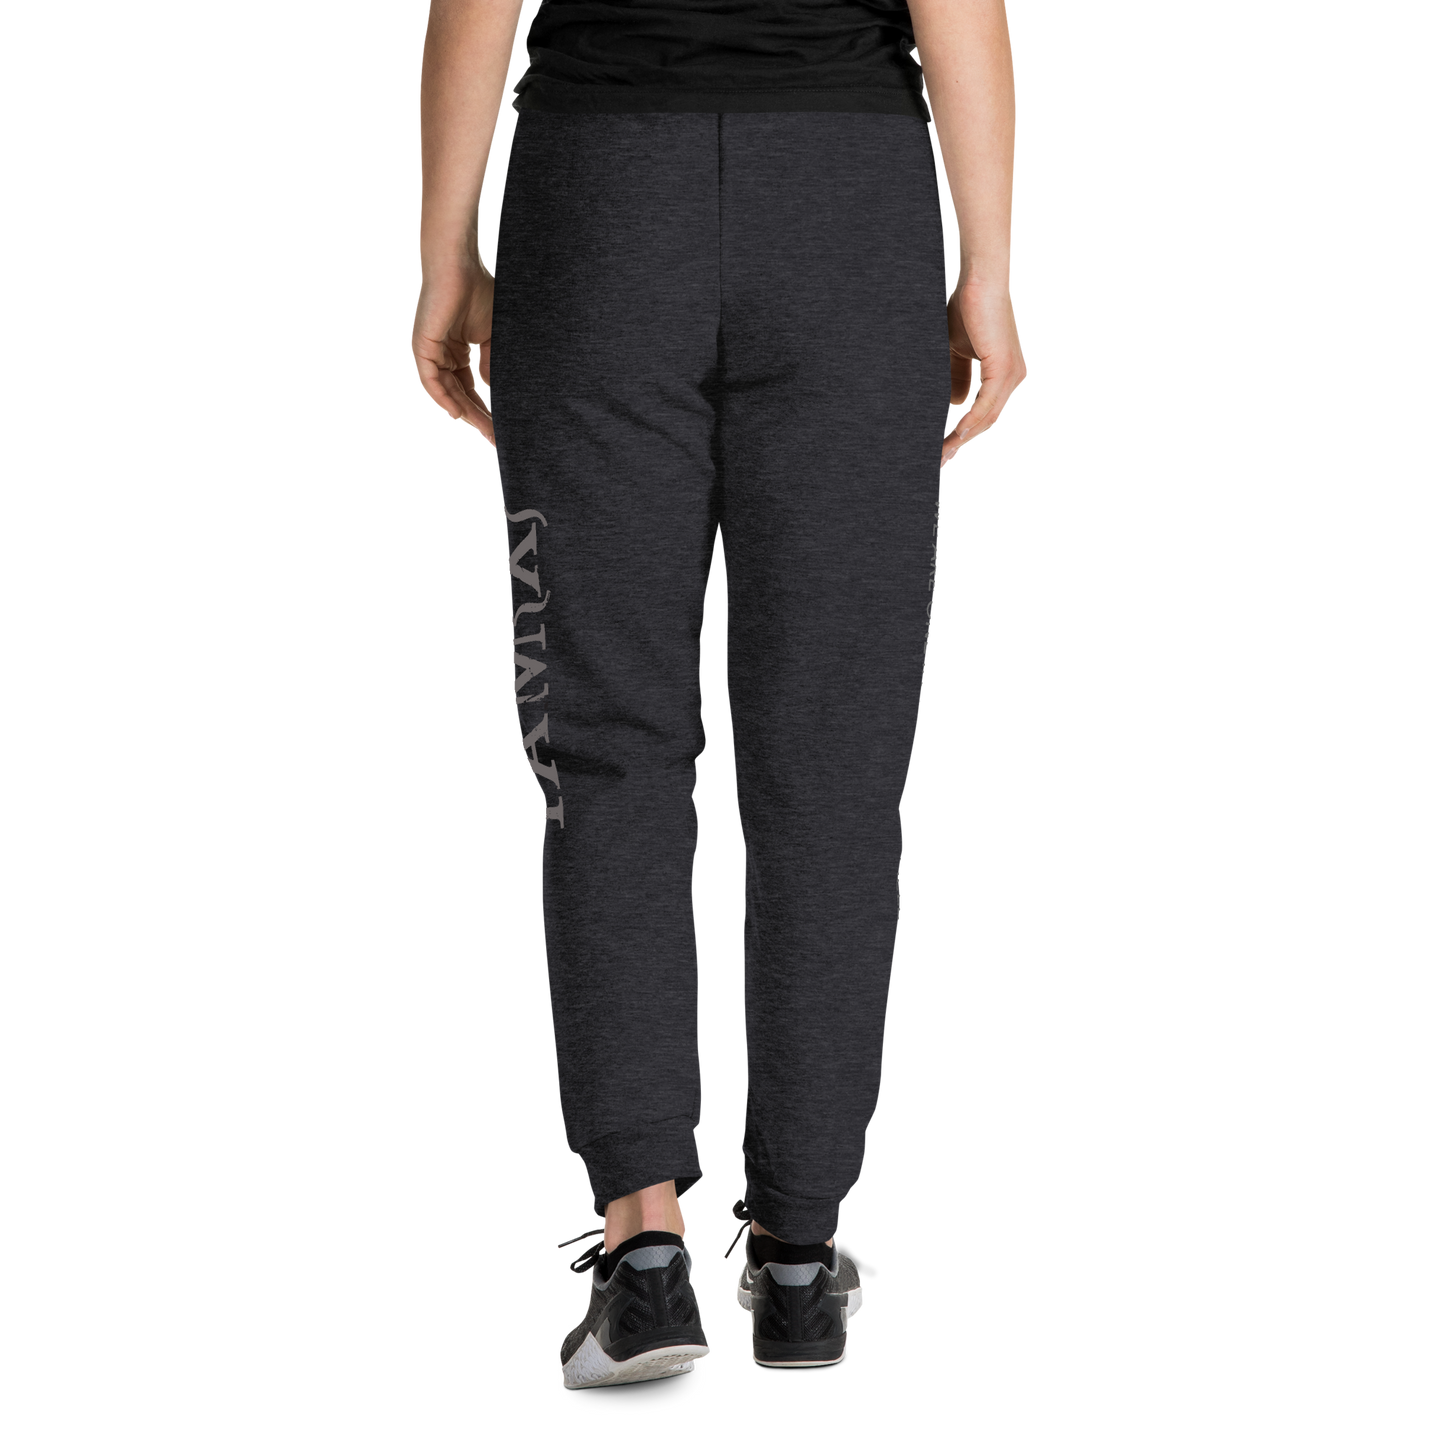 Unisex Joggers - "We Are One in the Unified Field"